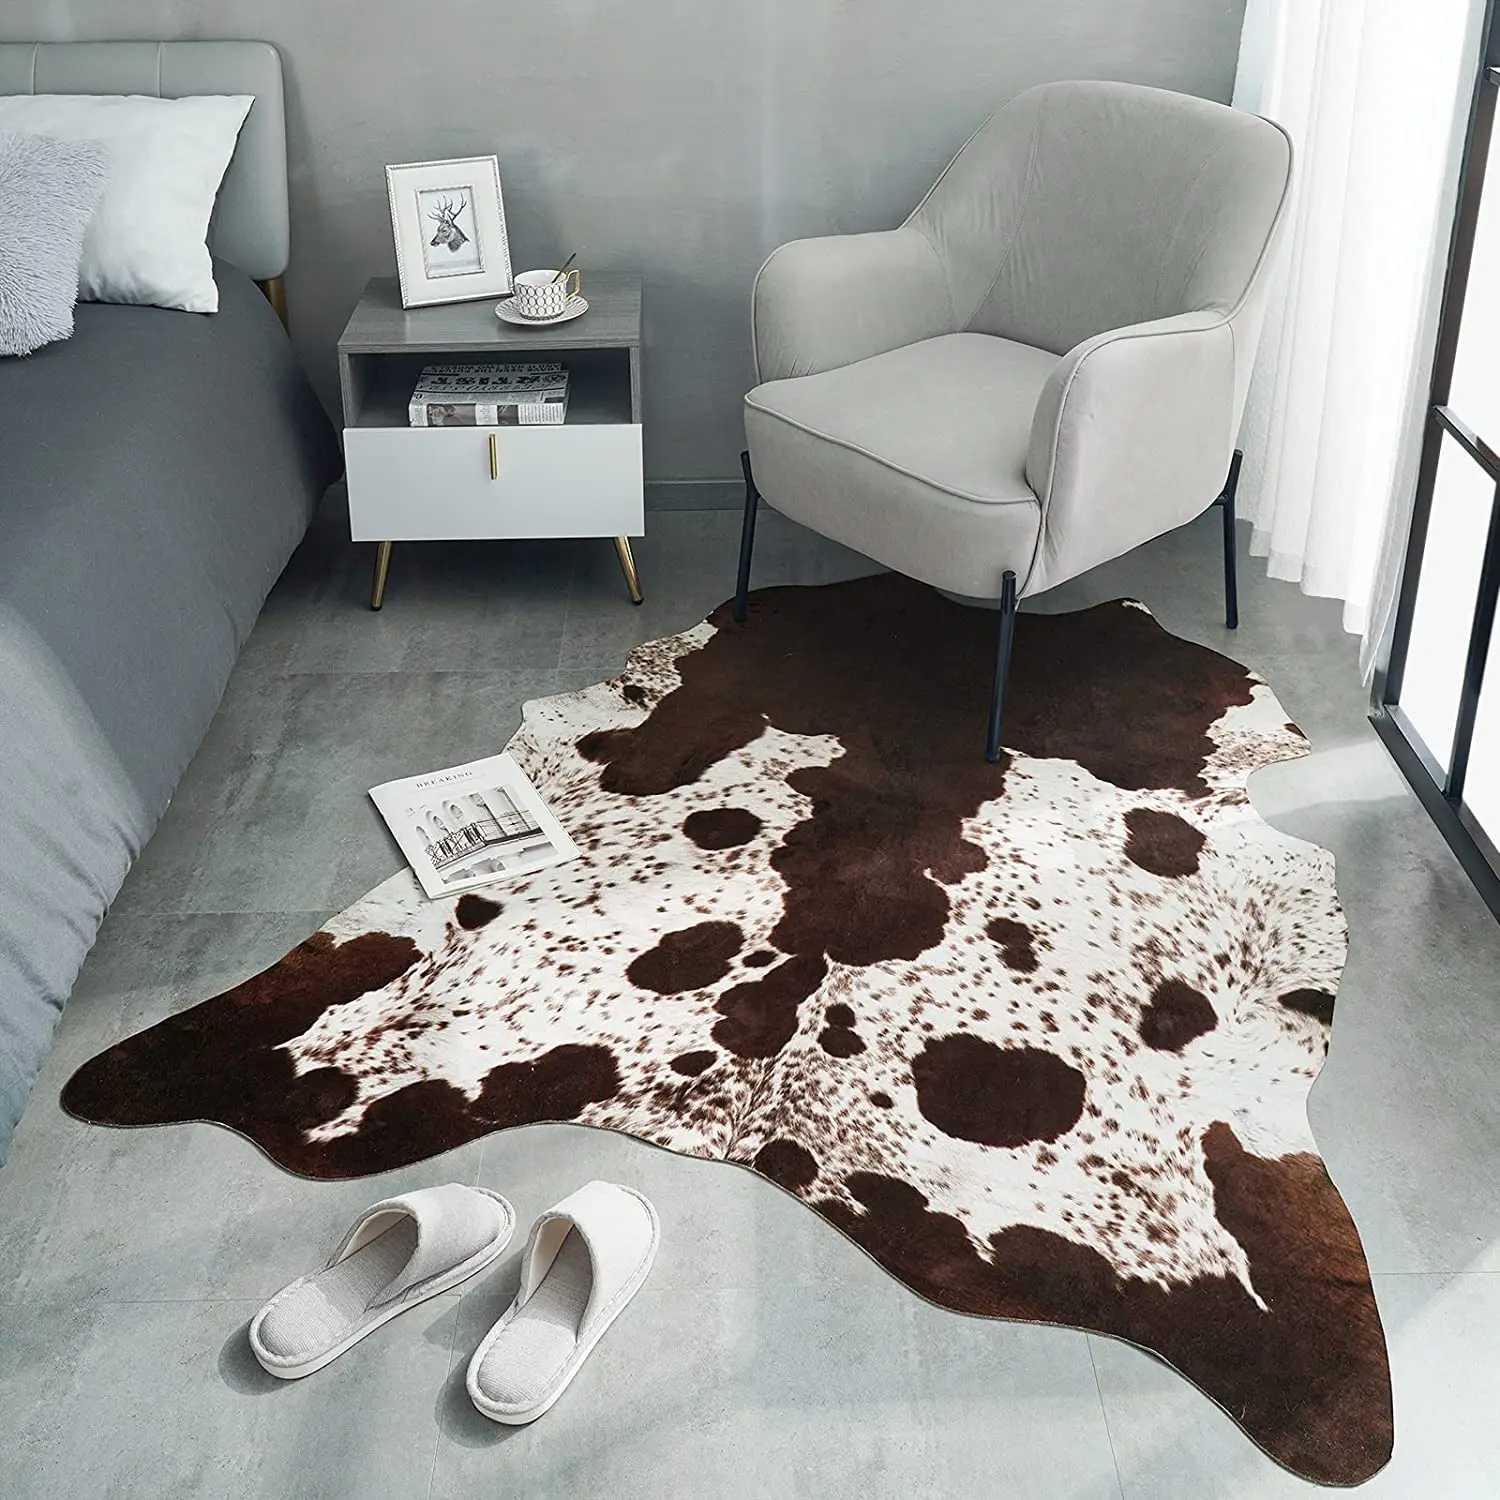 Cowhide Carpet Cow Print Rug American Style for Bedroom Living Room Cute Animal Printed Carpet Faux Cowhide Rugs for Home Decor 13